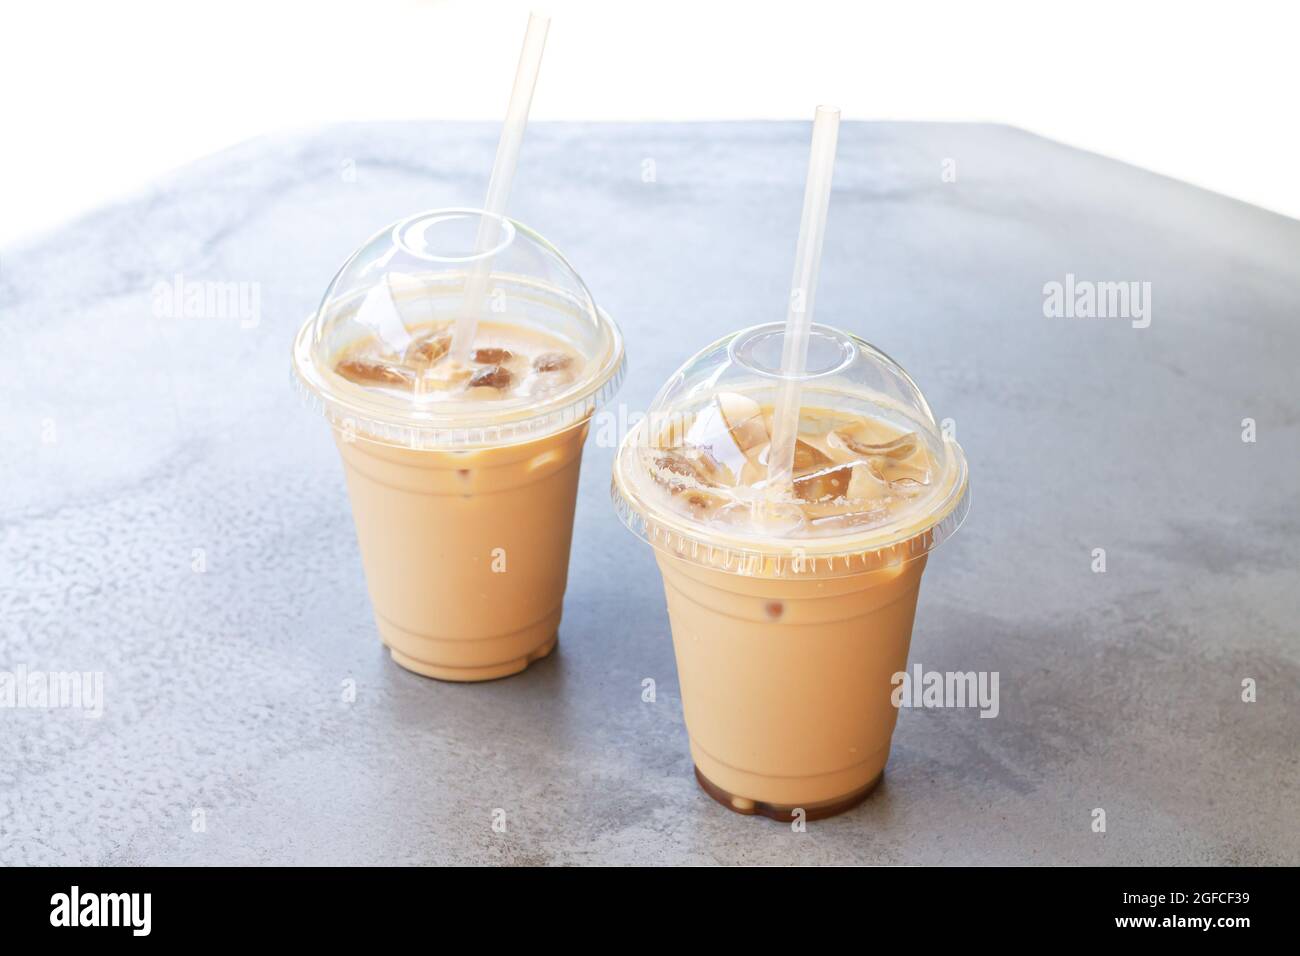 https://c8.alamy.com/comp/2GFCF39/two-iced-coffee-or-latte-in-take-away-plastic-cup-on-street-cafe-stone-table-2GFCF39.jpg